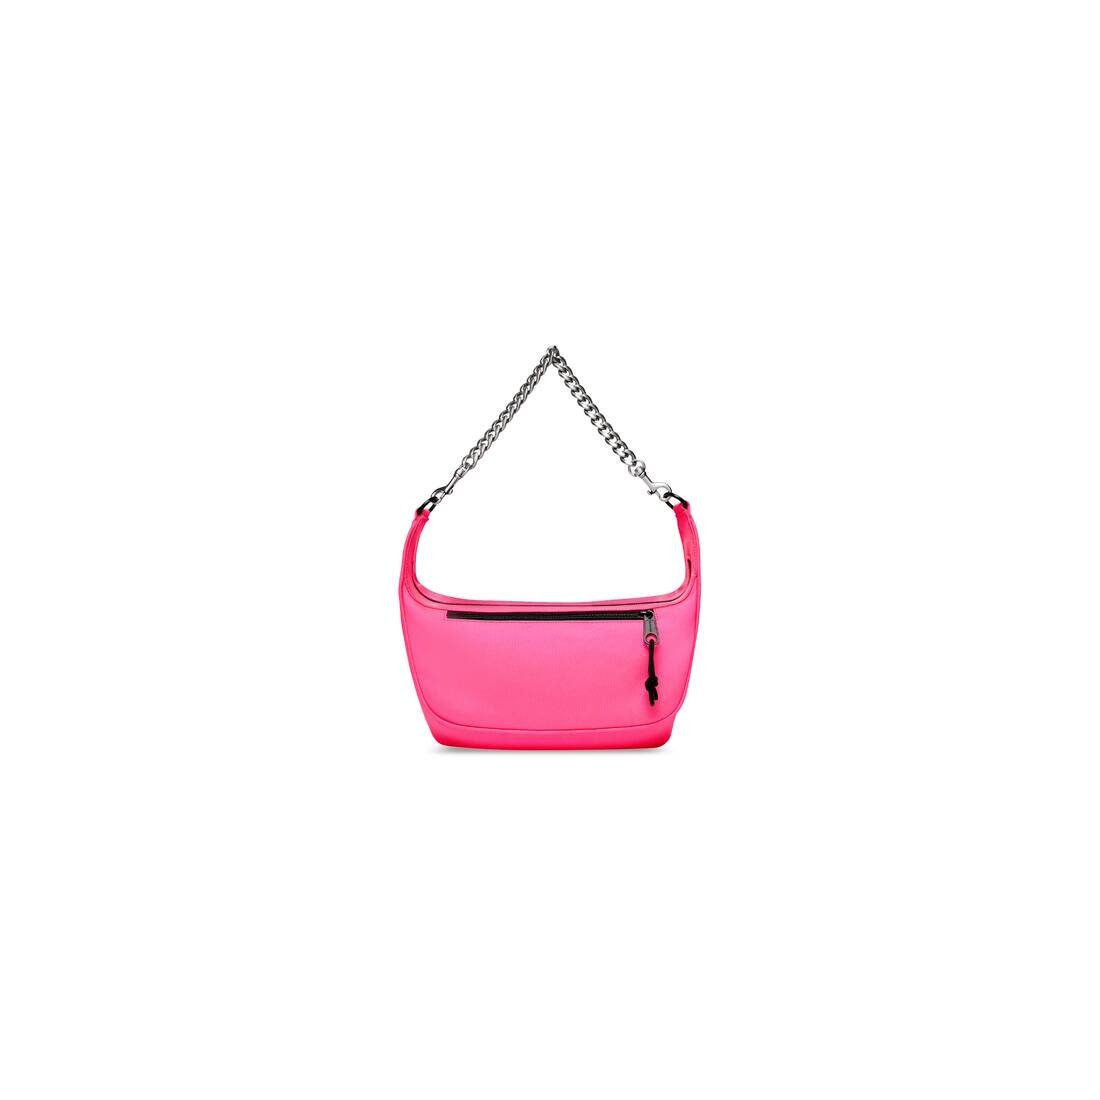 Raver Medium Bag With Chain in Fluo Pink - 6